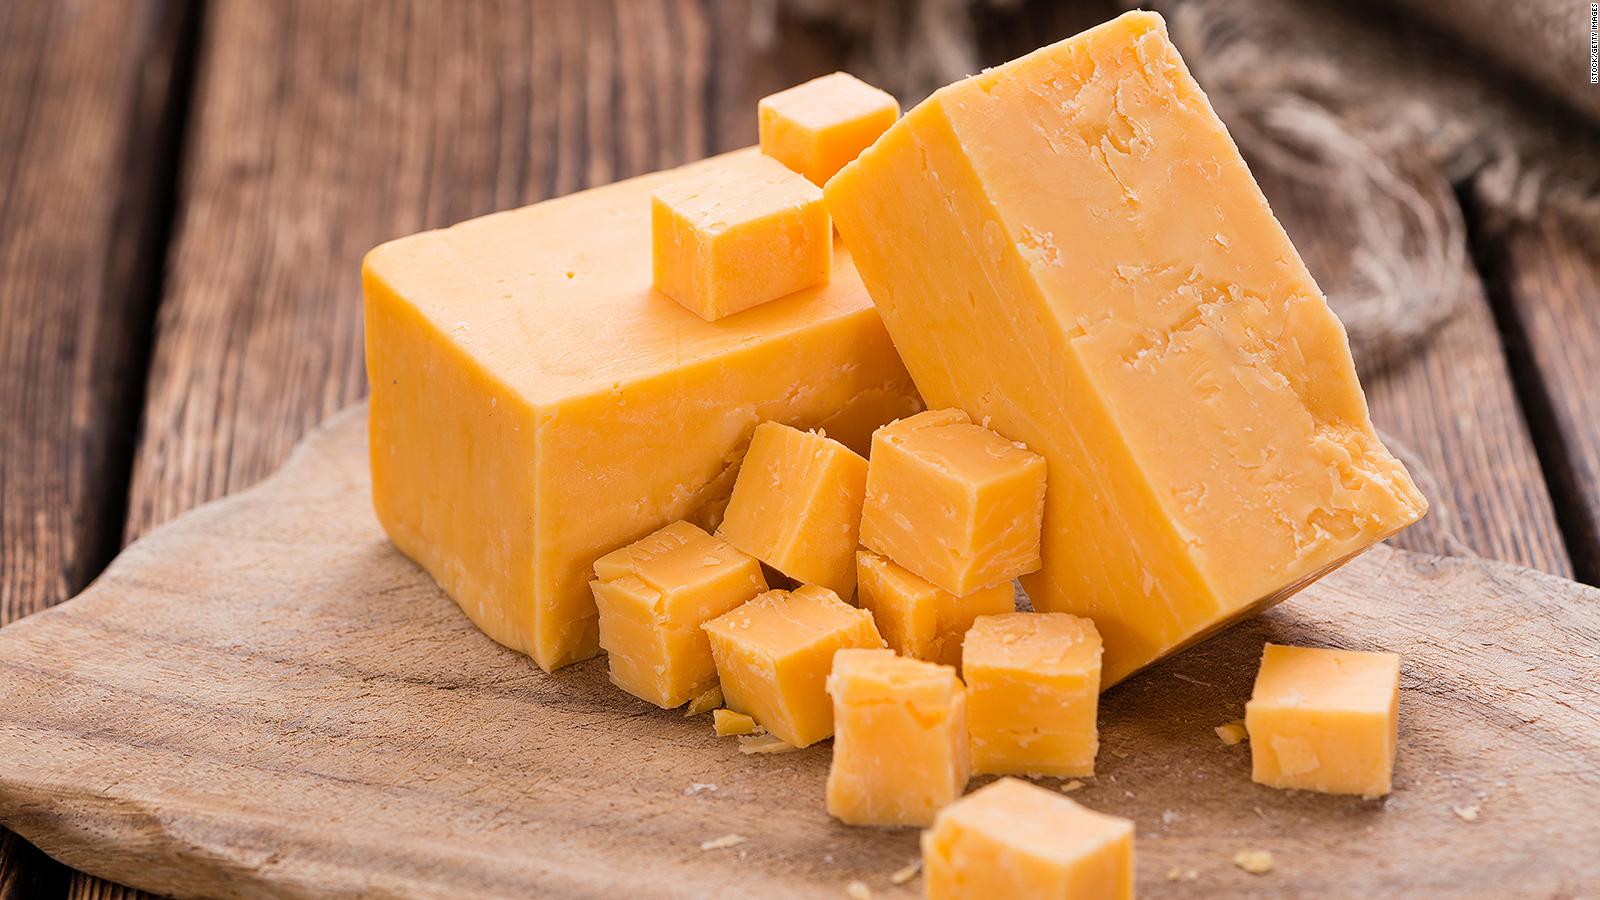 How cheddar cheese took over the world | CNN Travel